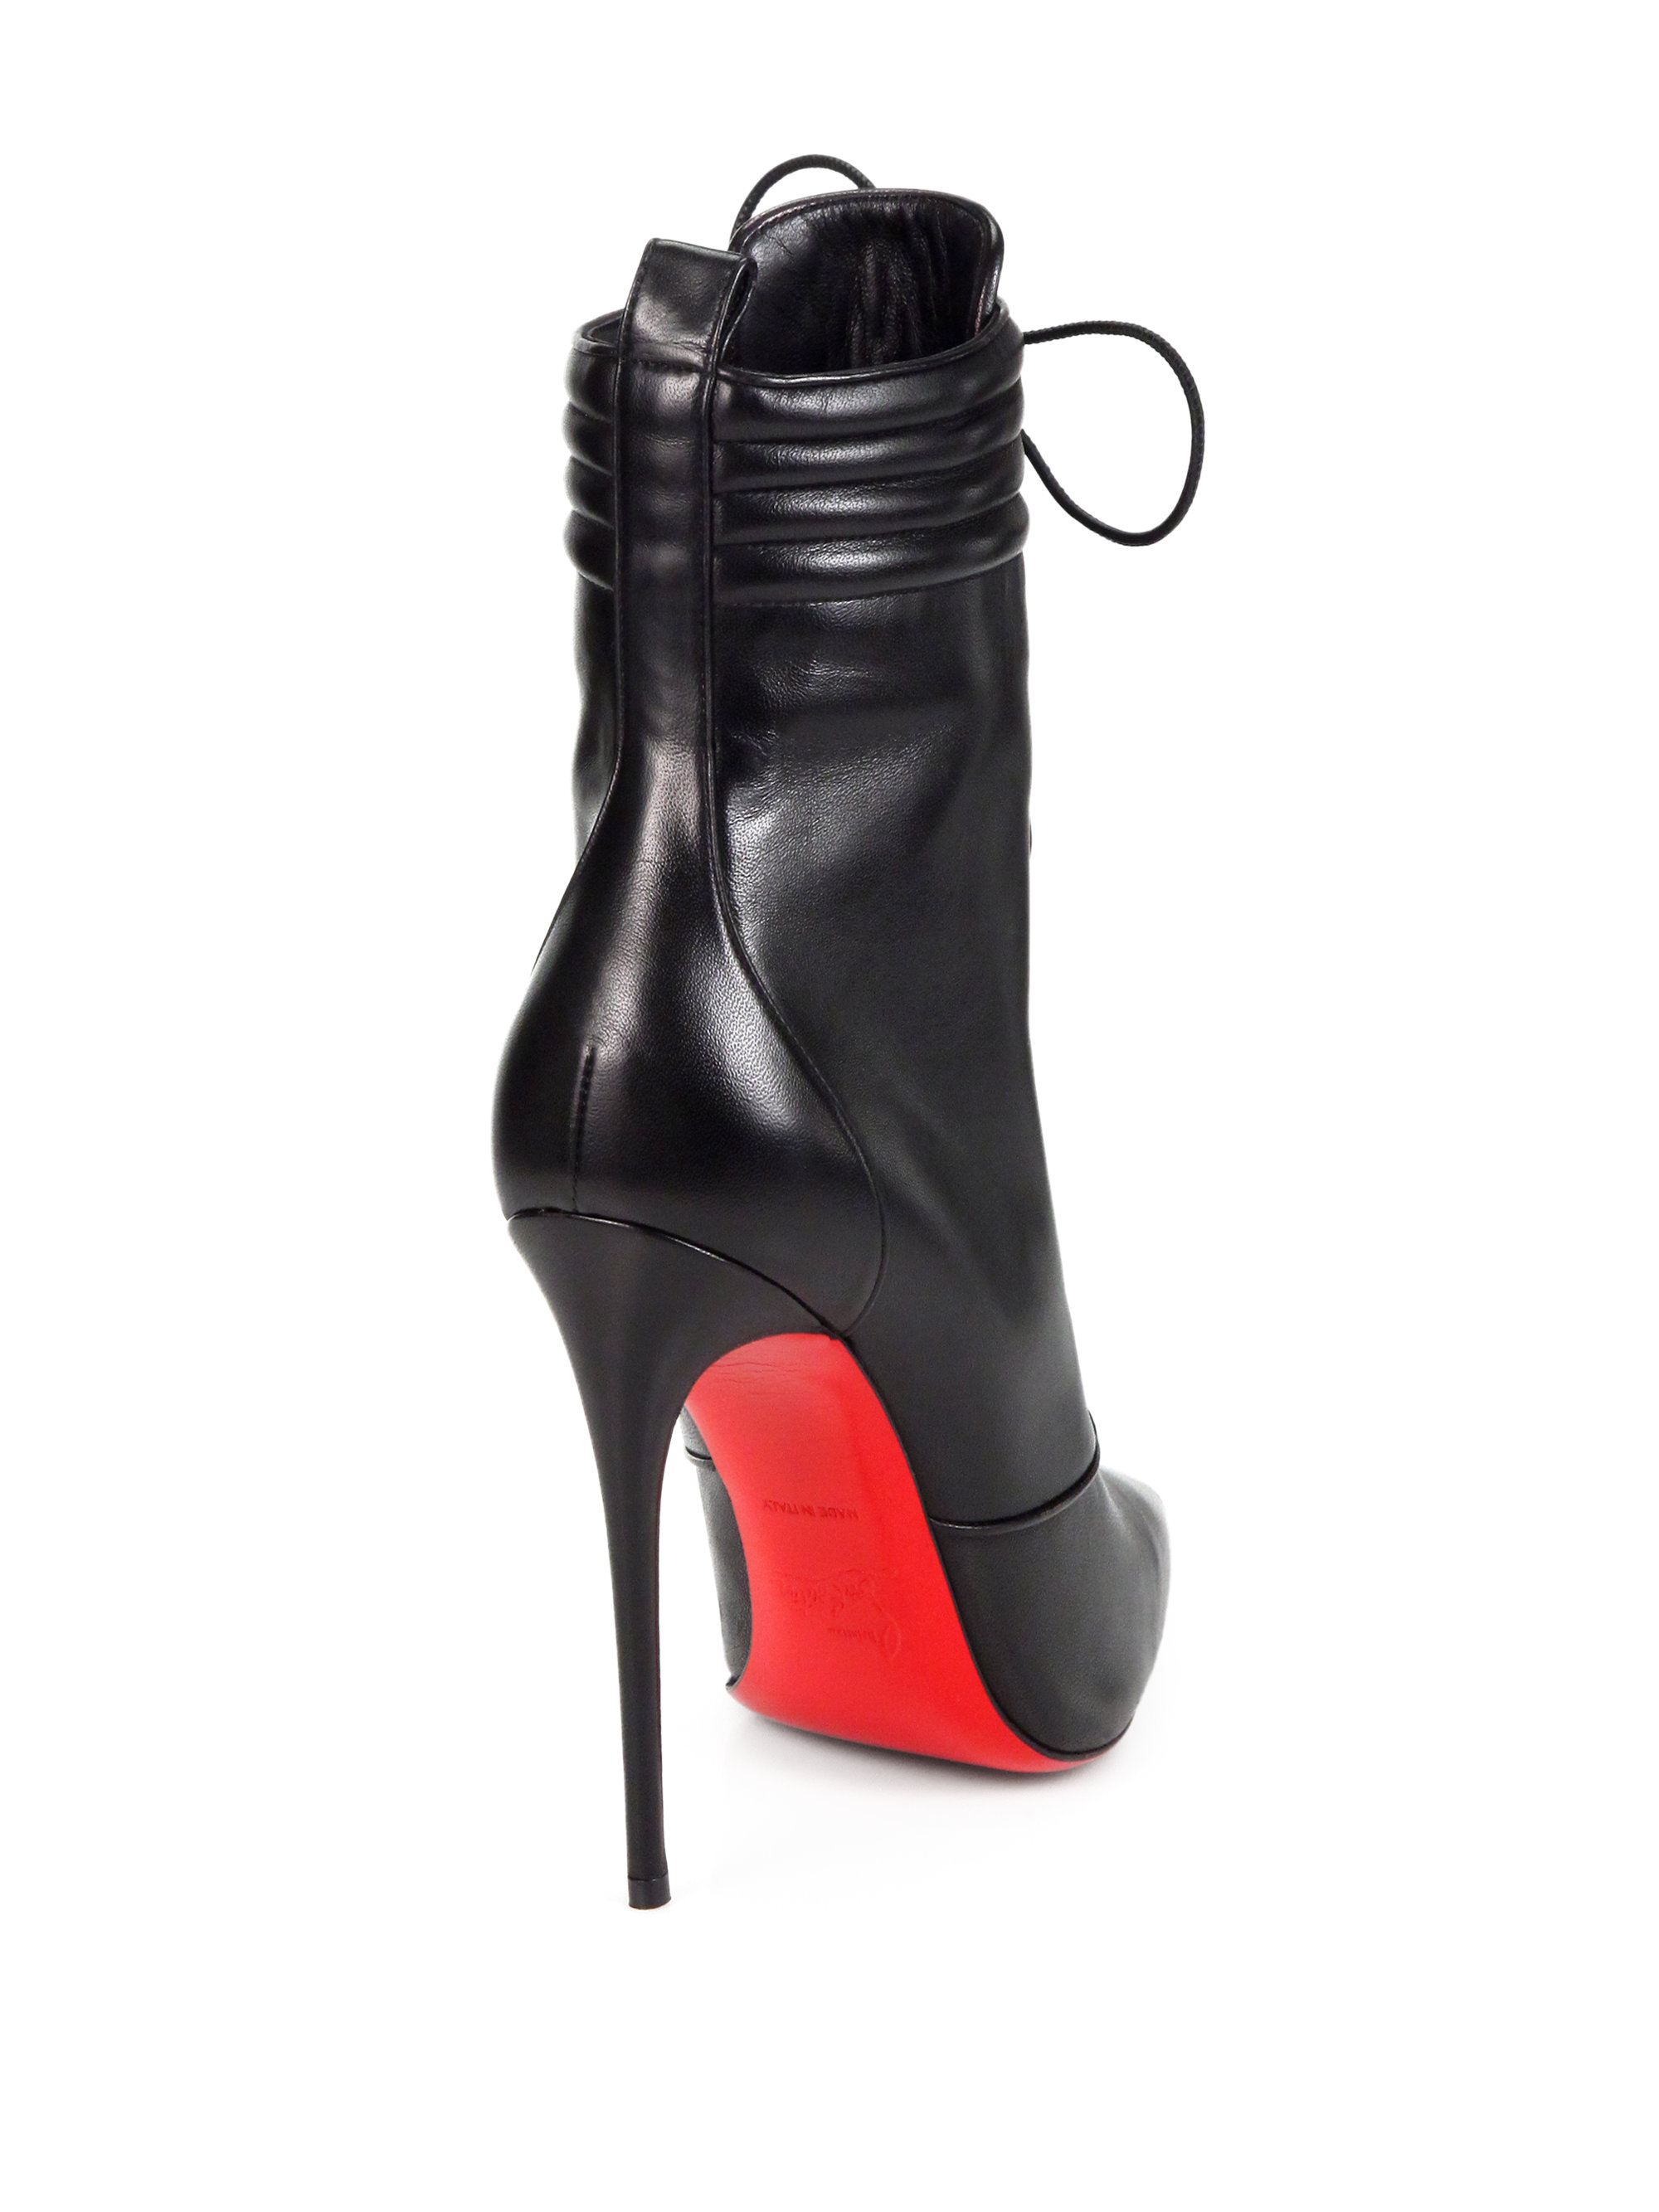 louboutin lace up booties